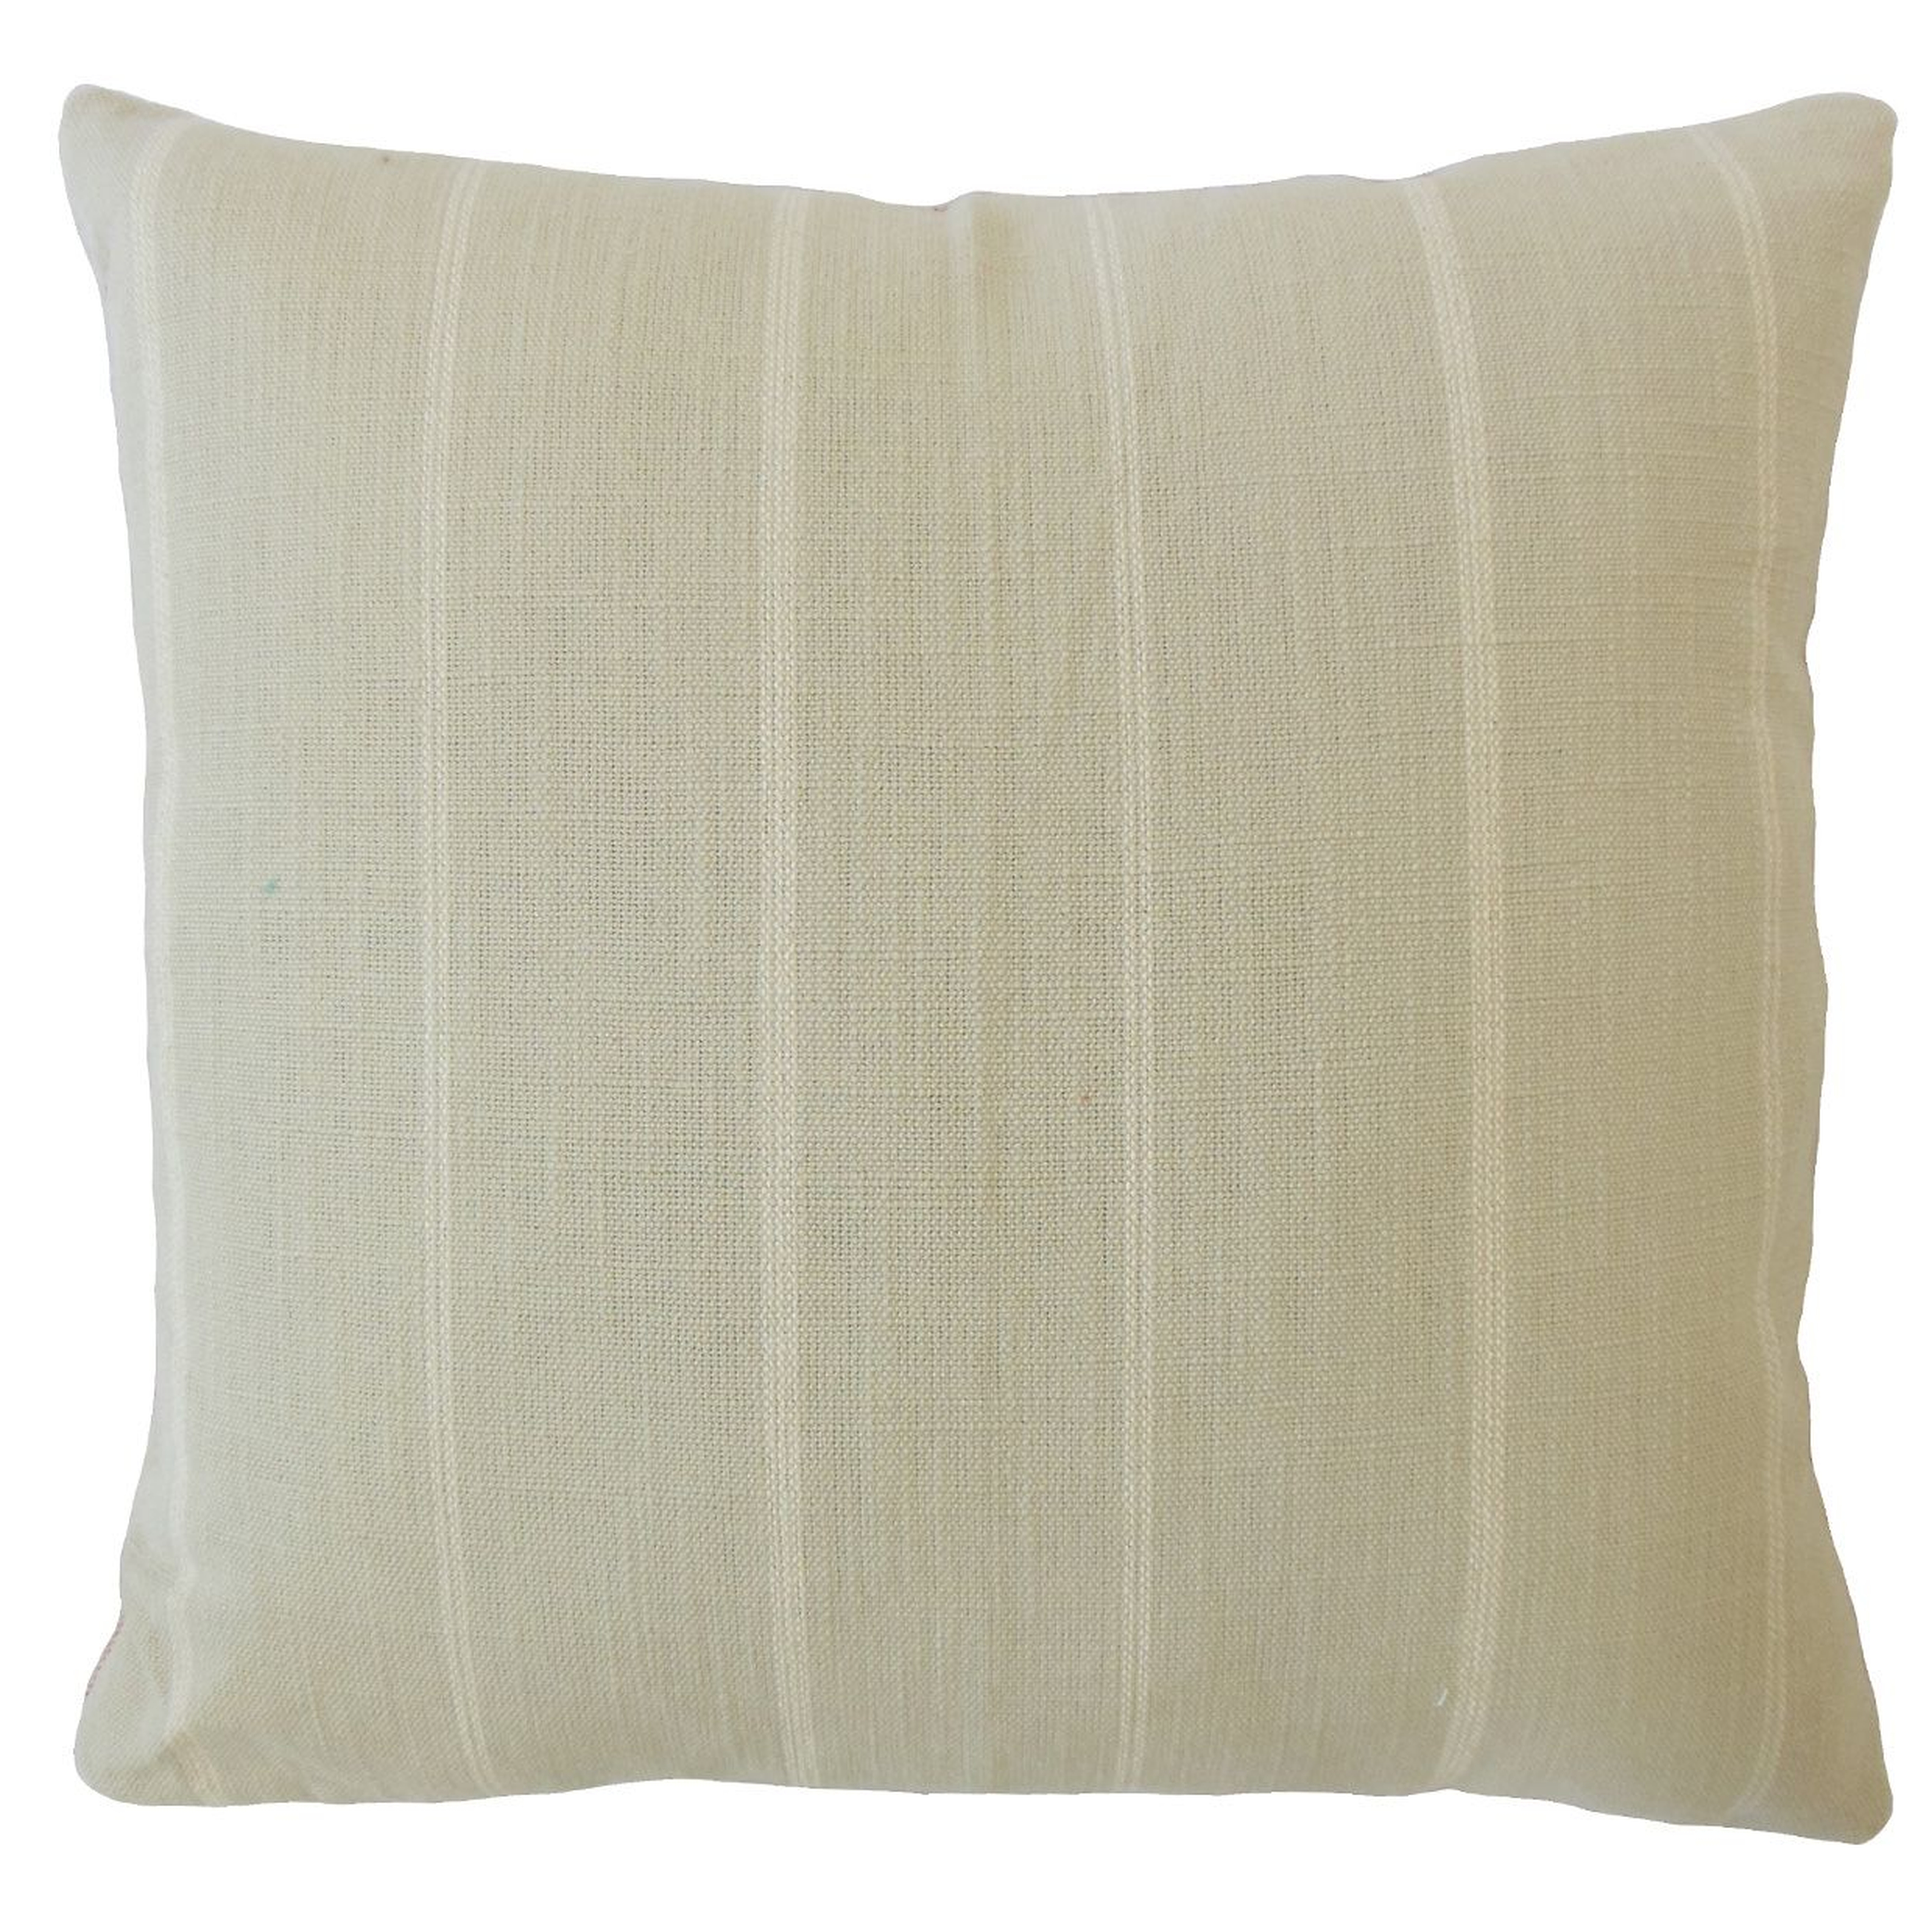 Tailored Stripe Pillow, Dove, 22" x 22" - Havenly Essentials